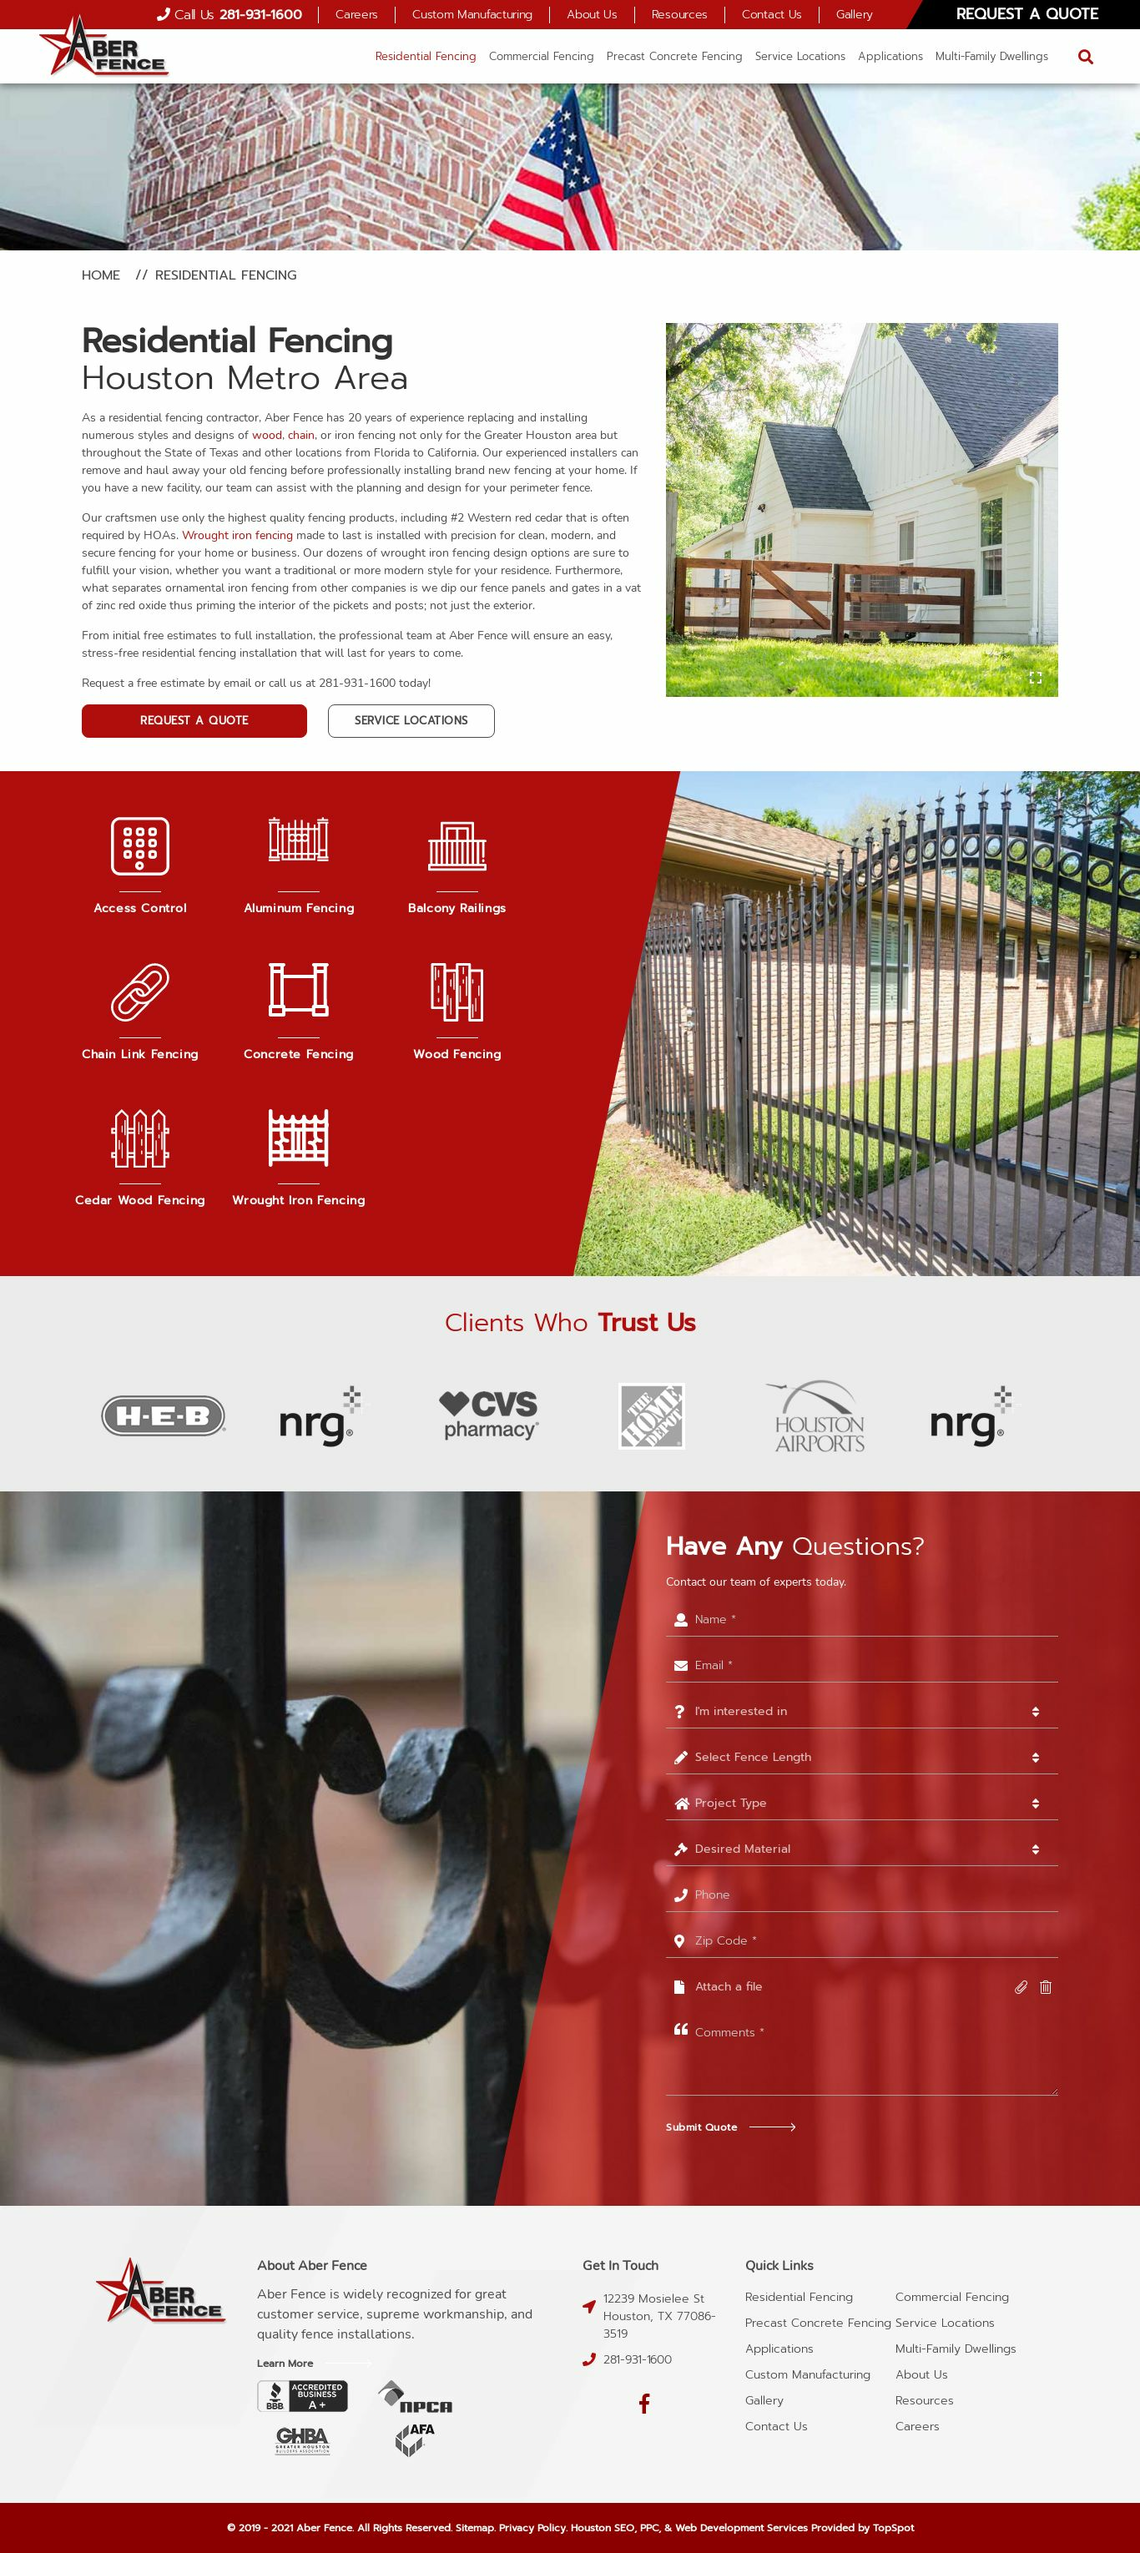 Landing Page Template for Fence Installation - aberfence.com